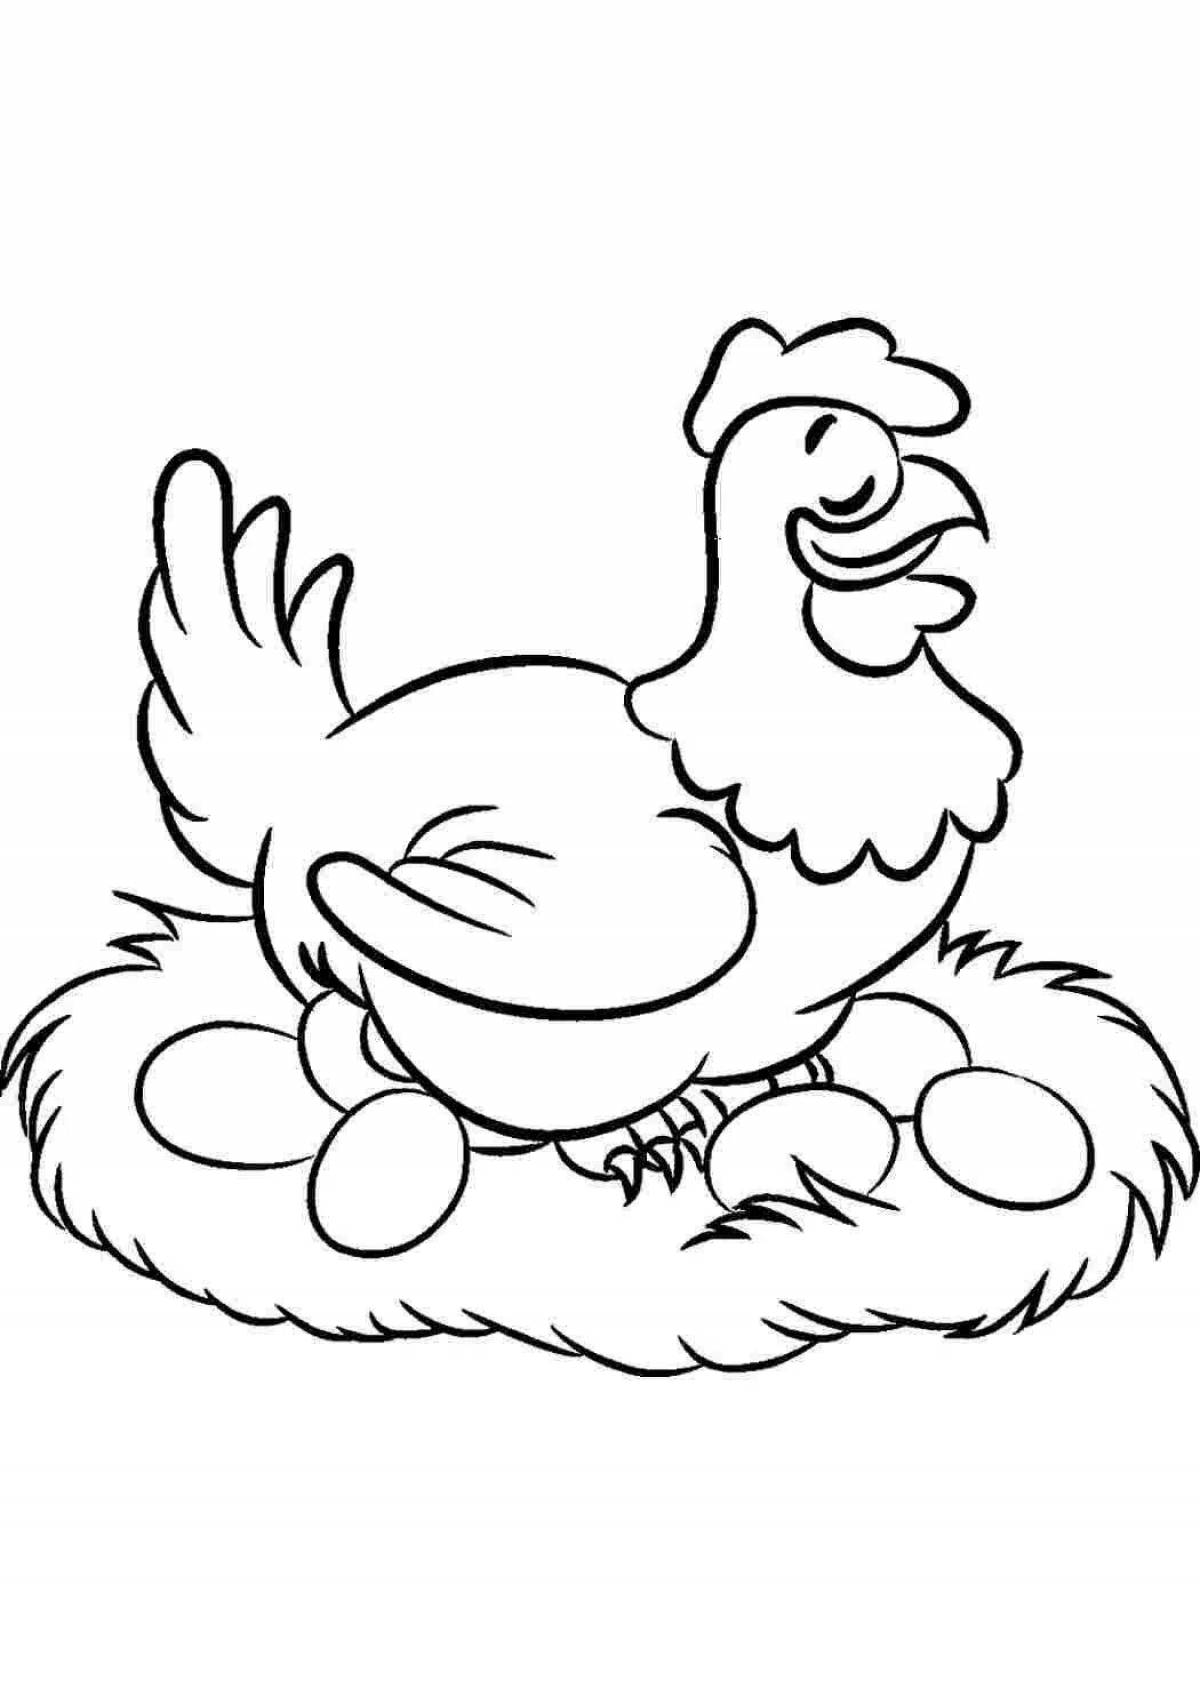 Rampant chicken coloring pages for kids